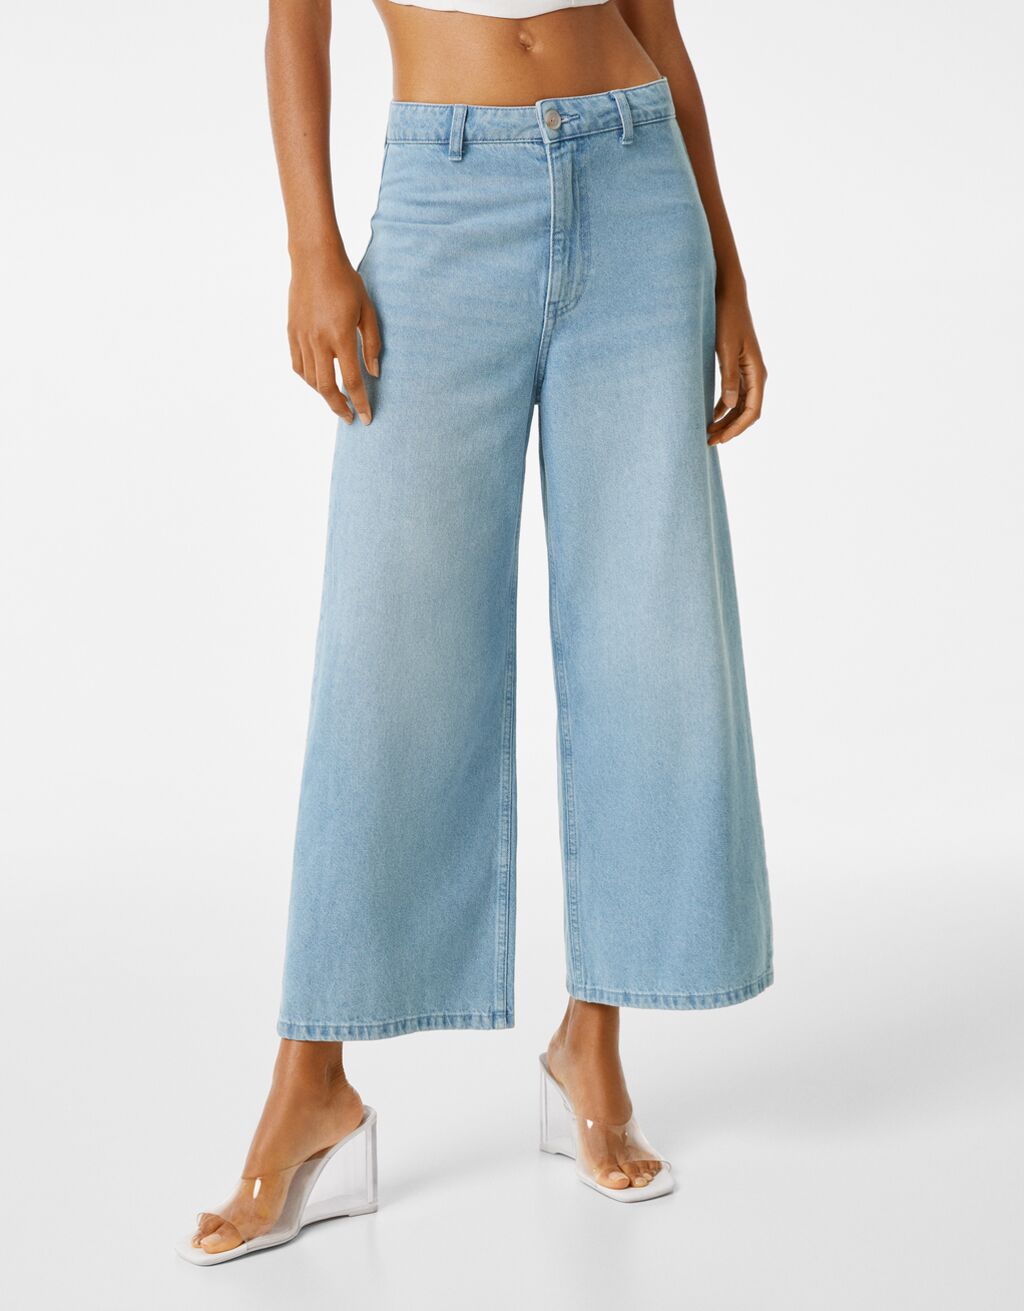 Jeans culottes